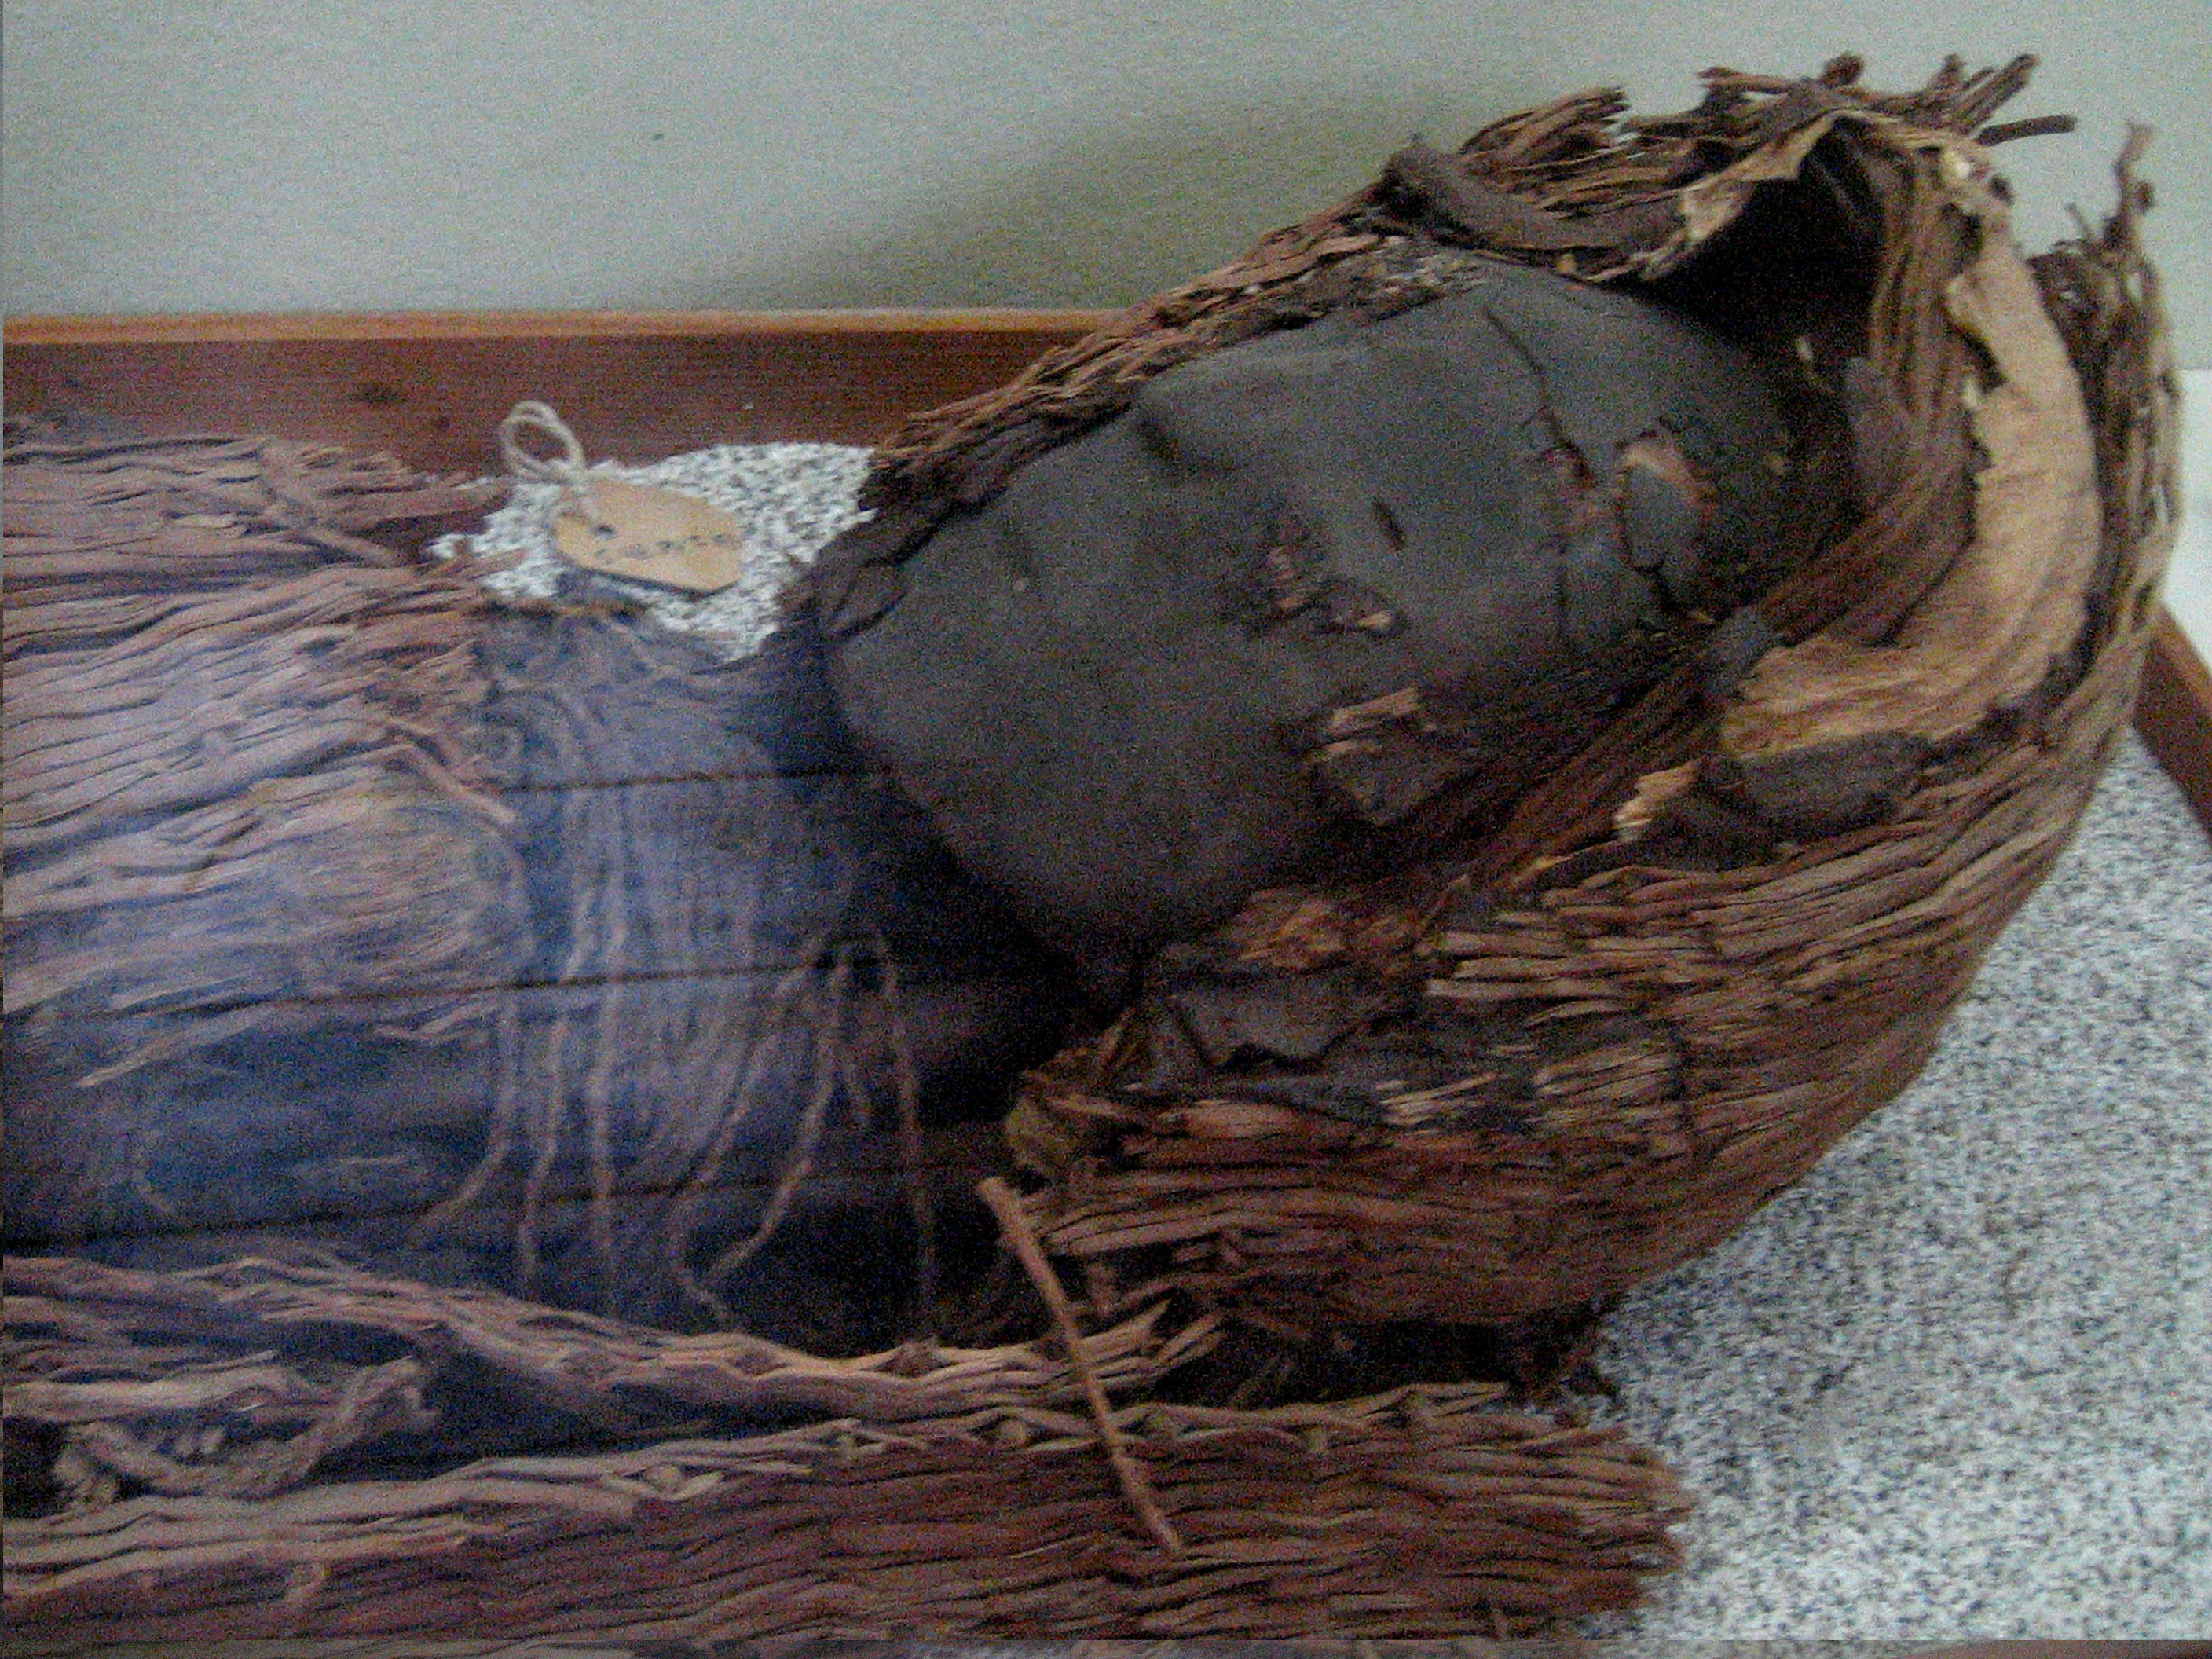 A mummy of the Chinchorro people, with blackened skin laying in a woven basket.